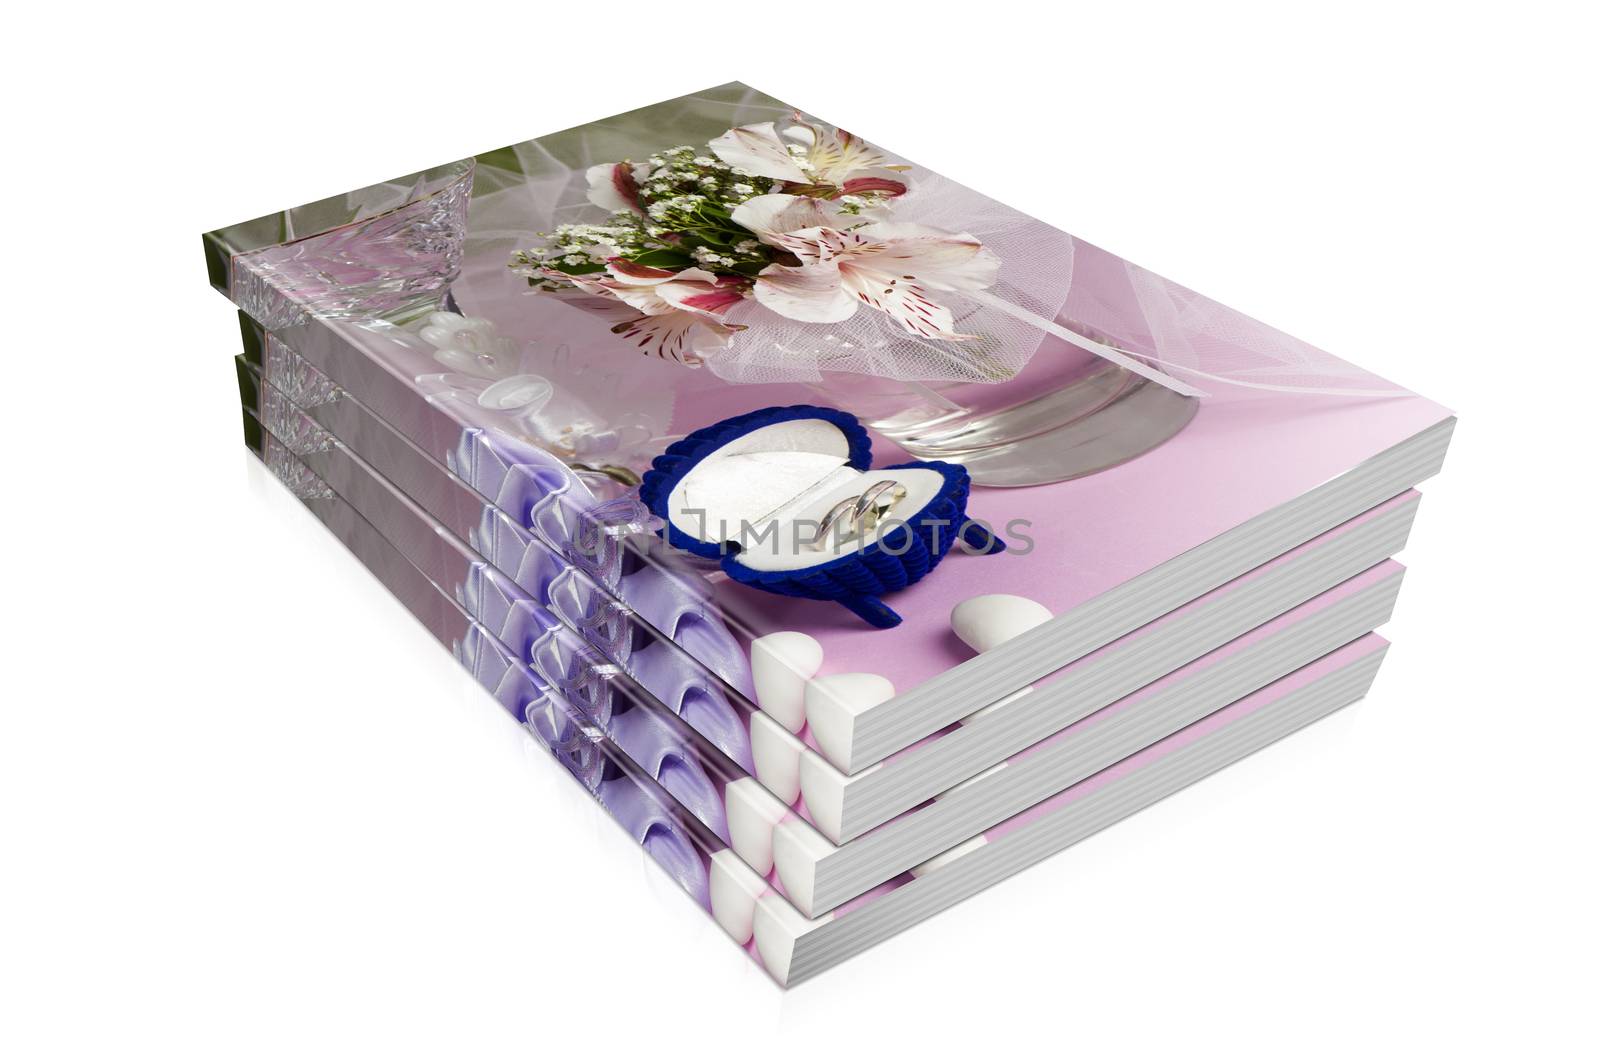 books  of  wedding rings and wedding favors on a colorful background